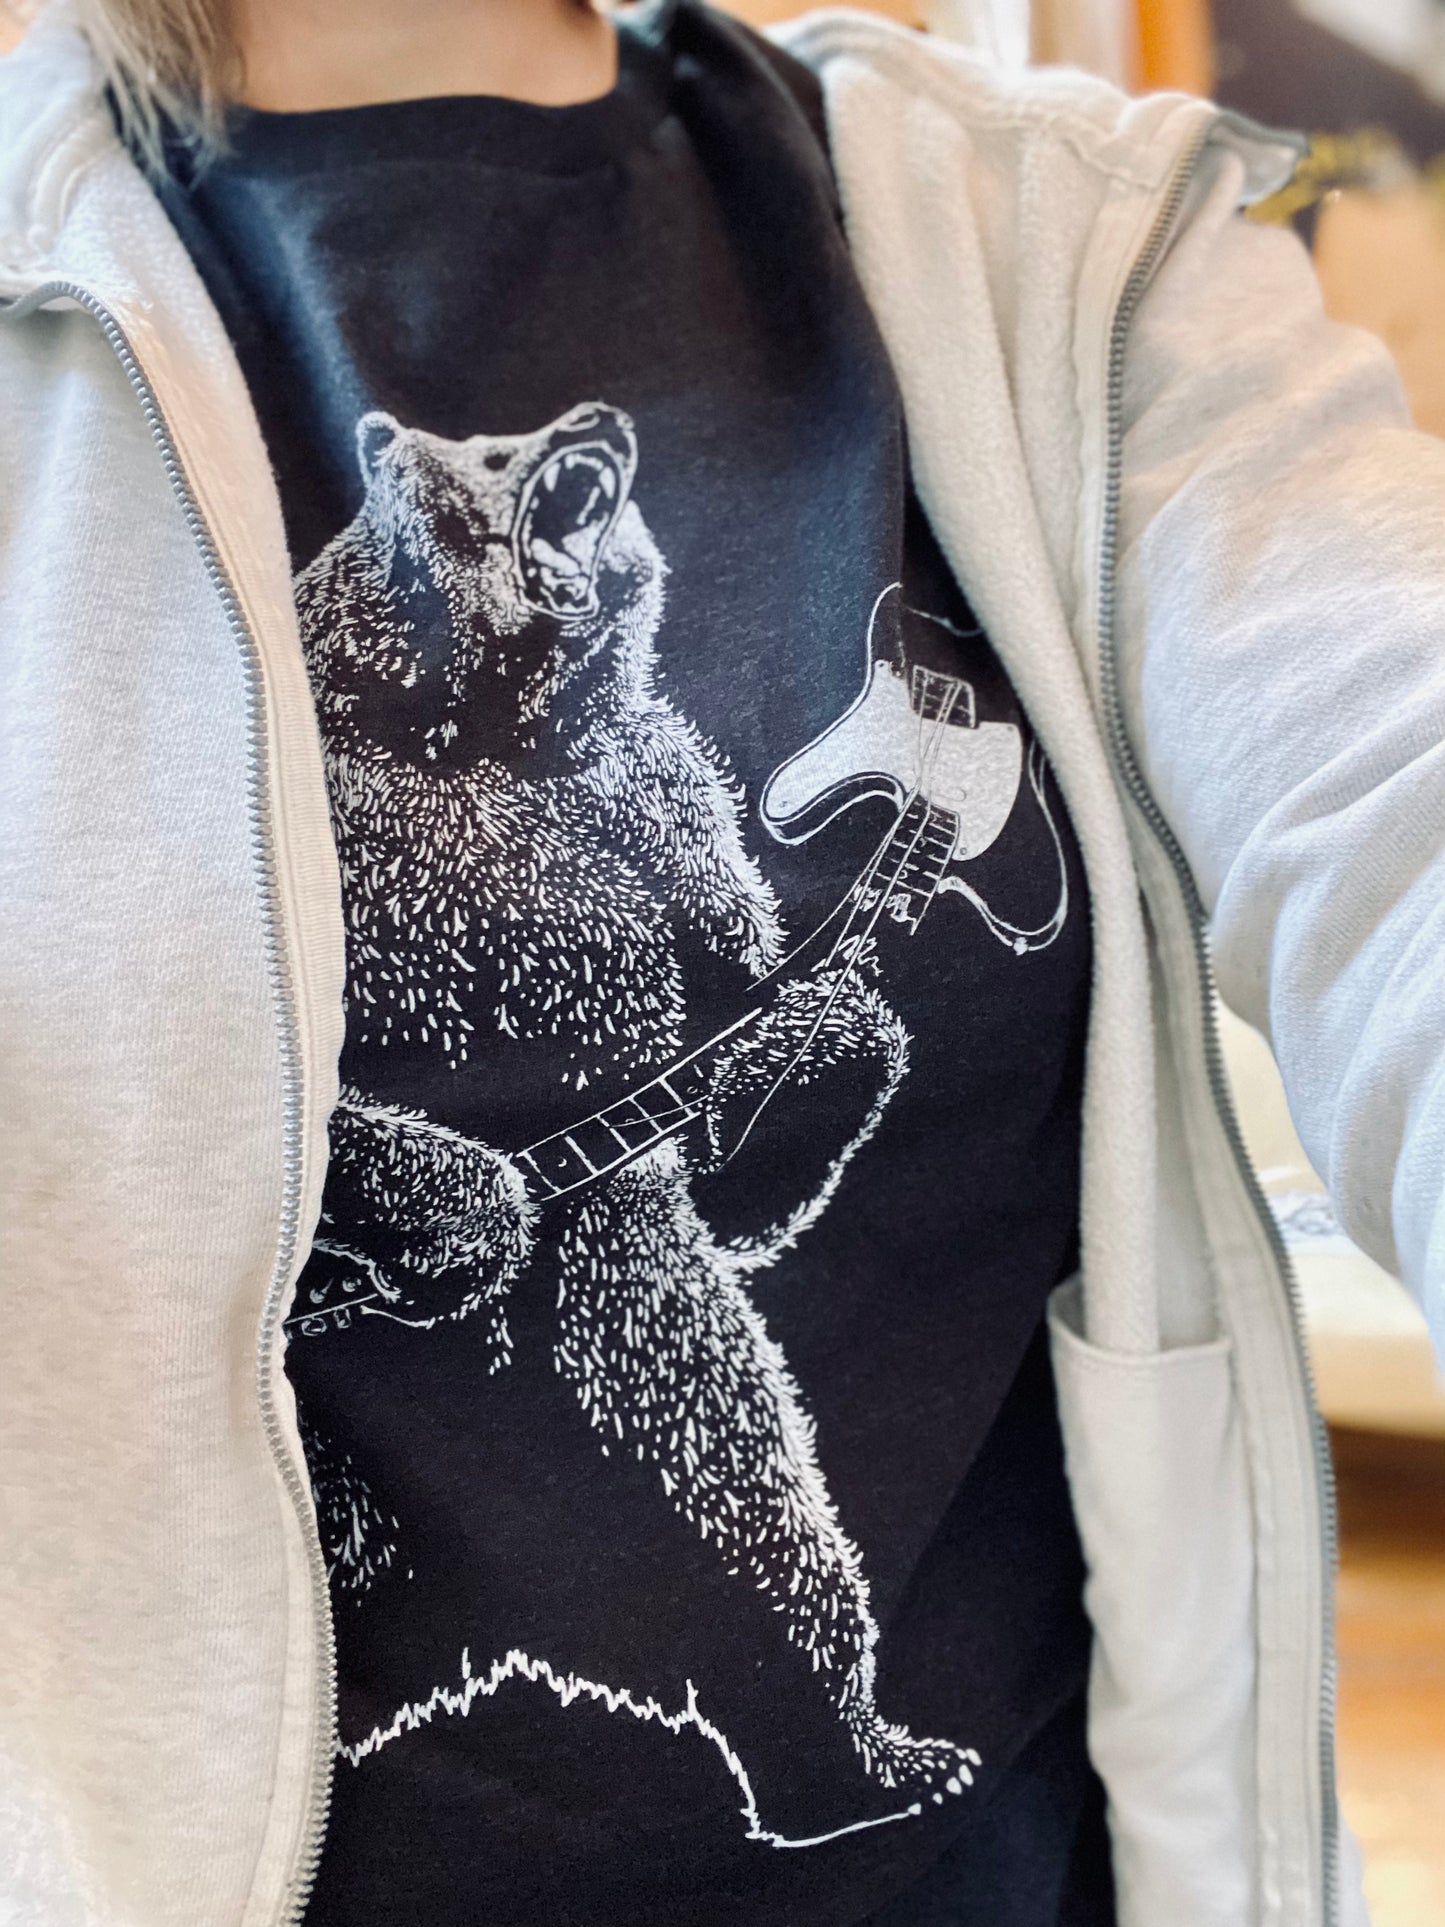 Guitar Bear - Graphic Tee for Her